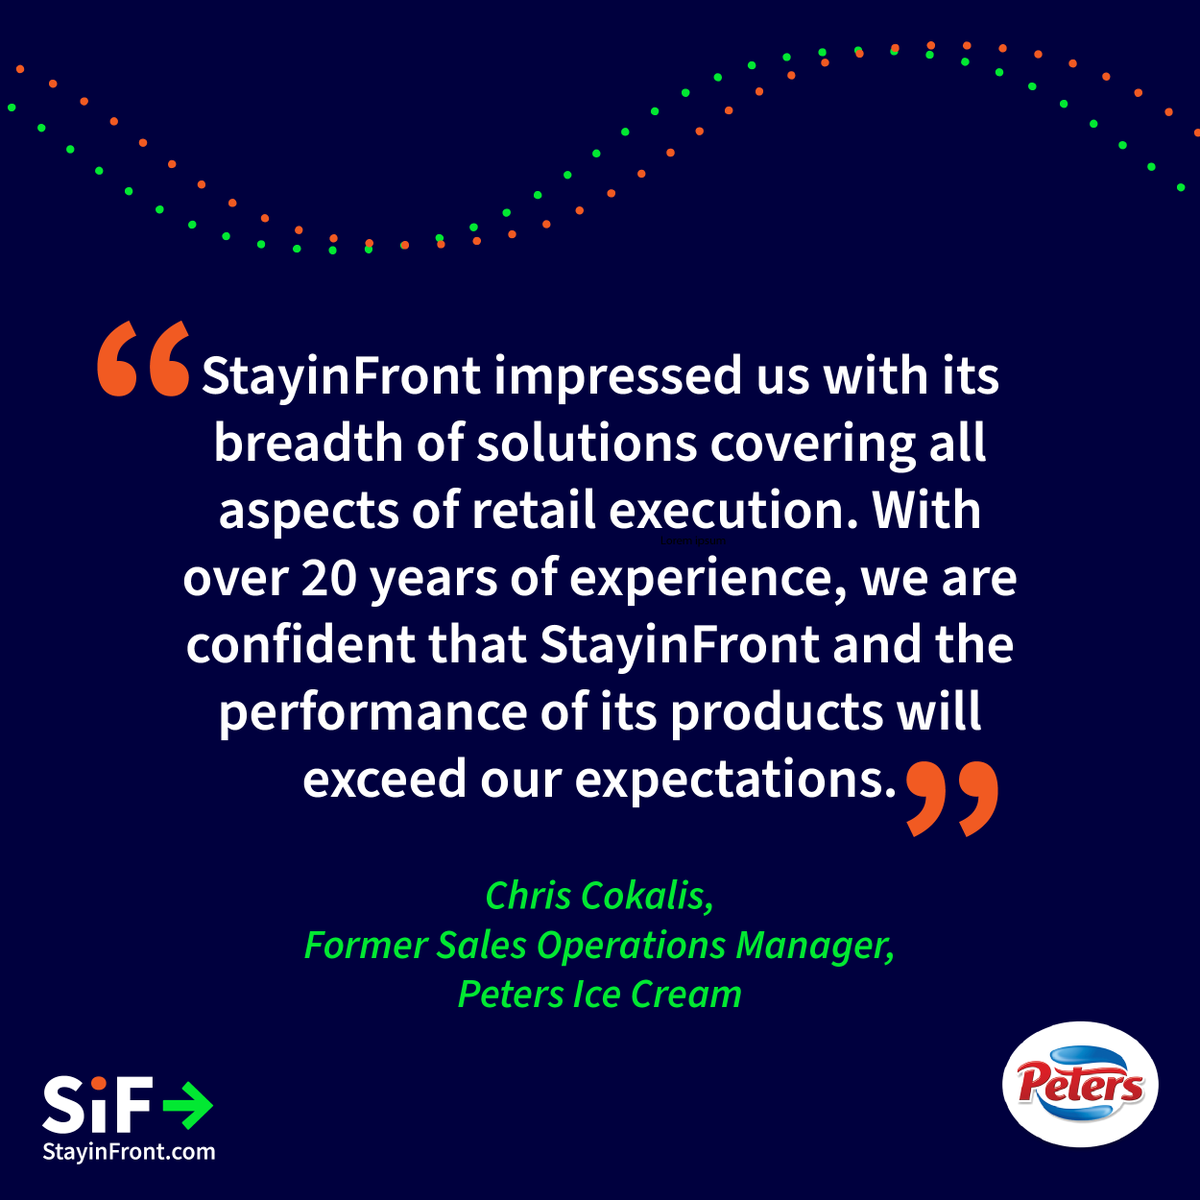 We have a range of solutions that will help you and your field team drive measurable growth! Contact our sales team today at sales@stayinfront.com to find out how we can help.

#DrivingGrowth #RetailOptimization #RetailExecution #CustomerExcellence